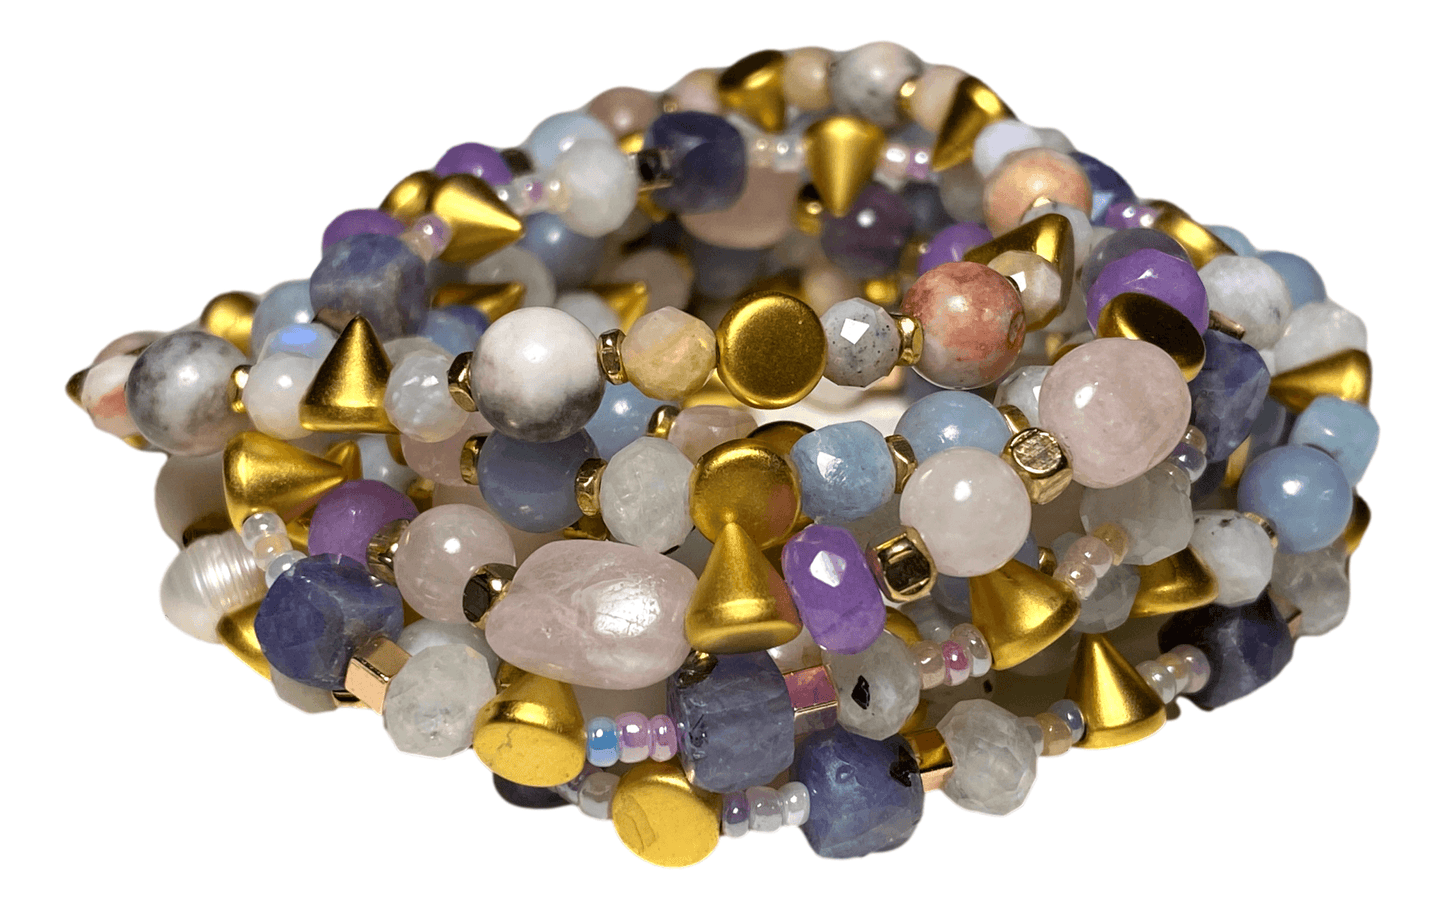 Bracelet Stretch Cone Accent Beads Semi-precious Stonestyles Select a Saint Charm Handmade by Skilled Artisan 2 1/2 W Inches - Ysleta Mission Gift Shop- VOTED El Paso's Best Gift Shop